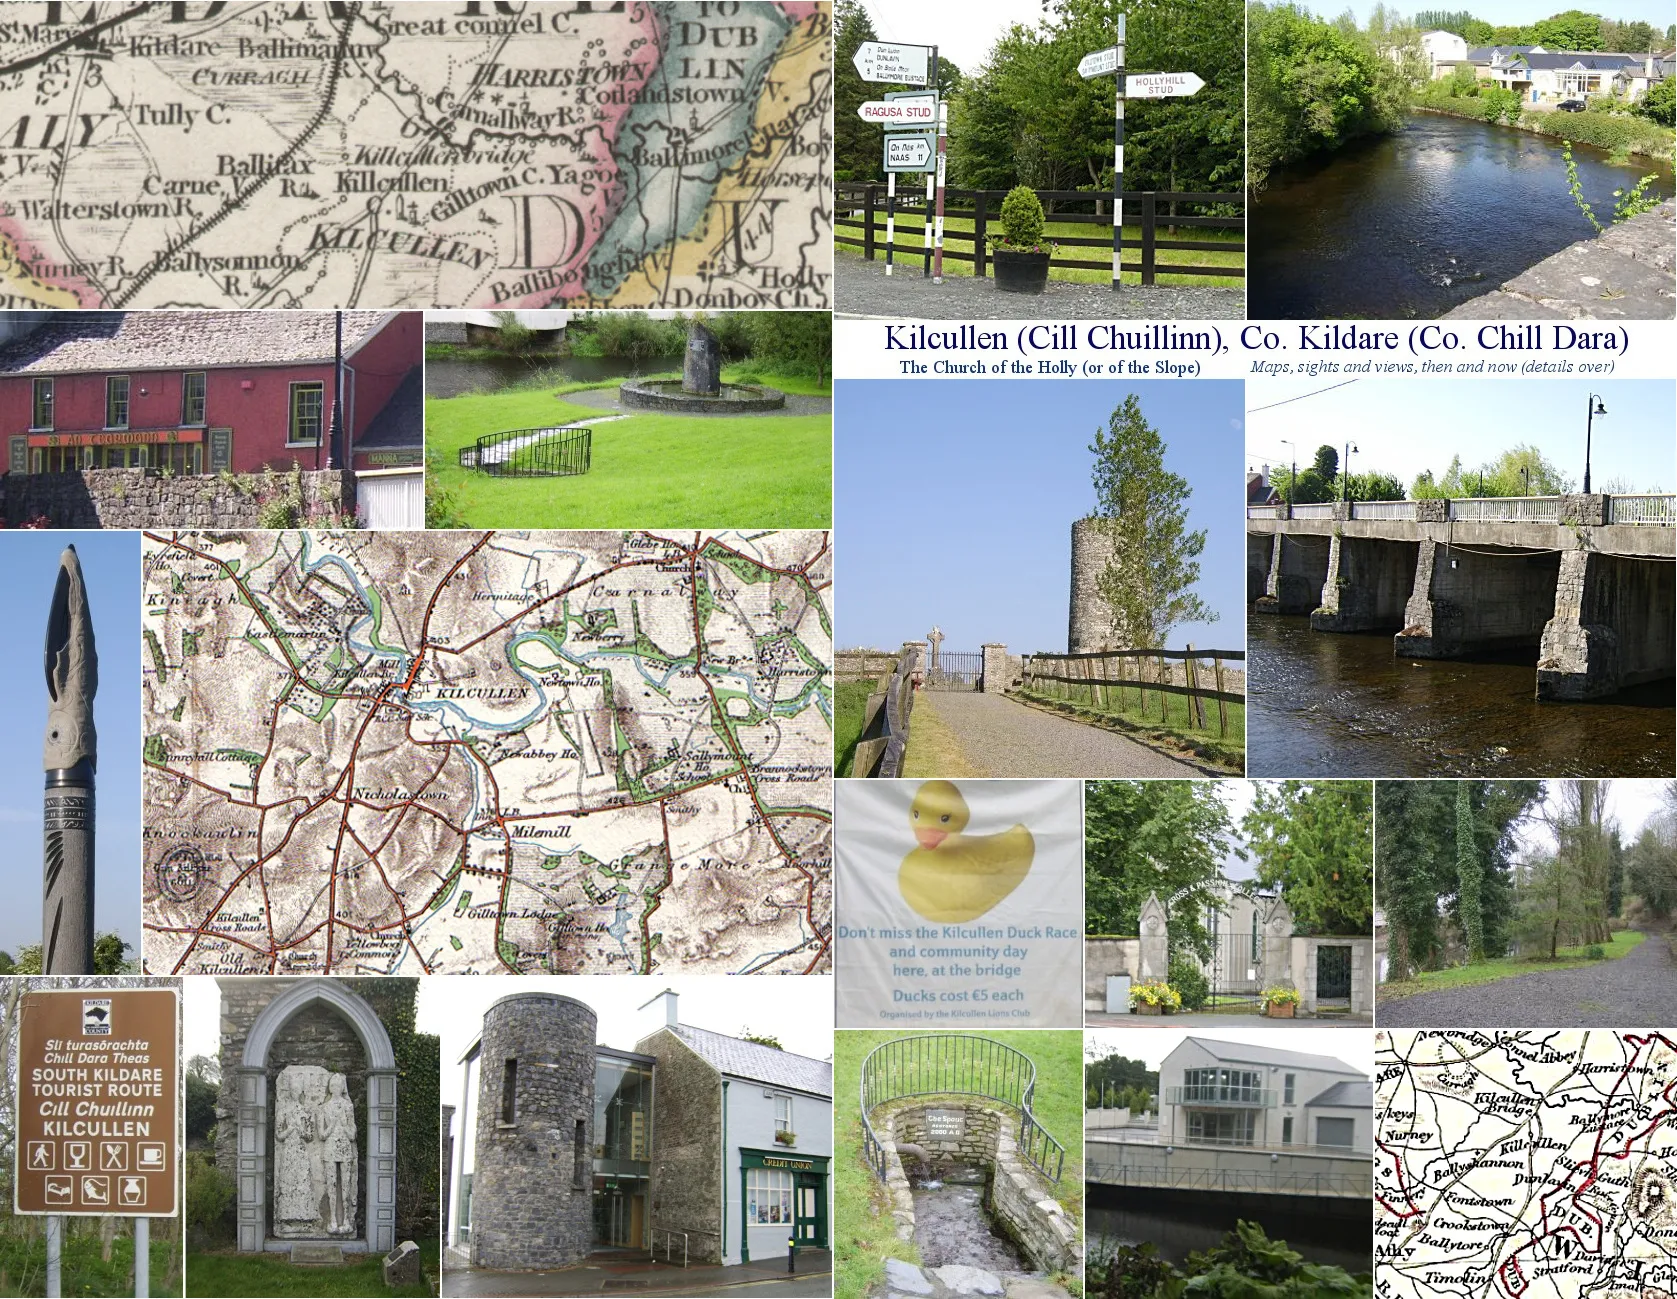 Photo showing: Postcard of Kilcullen, Co. Kildare, Ireland - 18th century map, roadsigns, R. Liffey, charity cafe and bookshop, memorial in community park, Irish round tower at site of old walled town, Kilcullen bridge, memorial of Dun Ailinne, 19th century map, Portlester Monument and other local scenes.